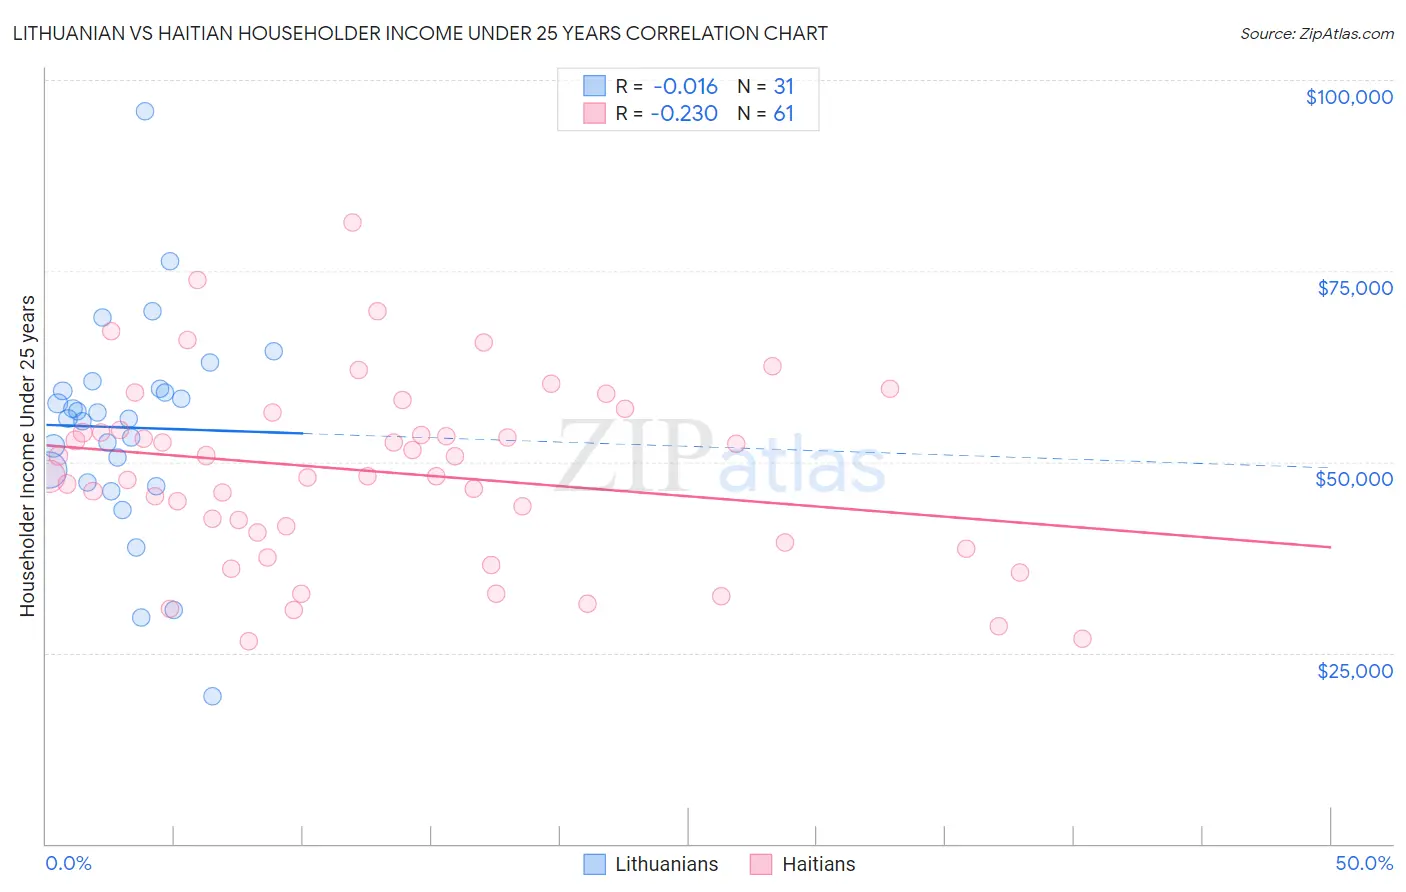 Lithuanian vs Haitian Householder Income Under 25 years